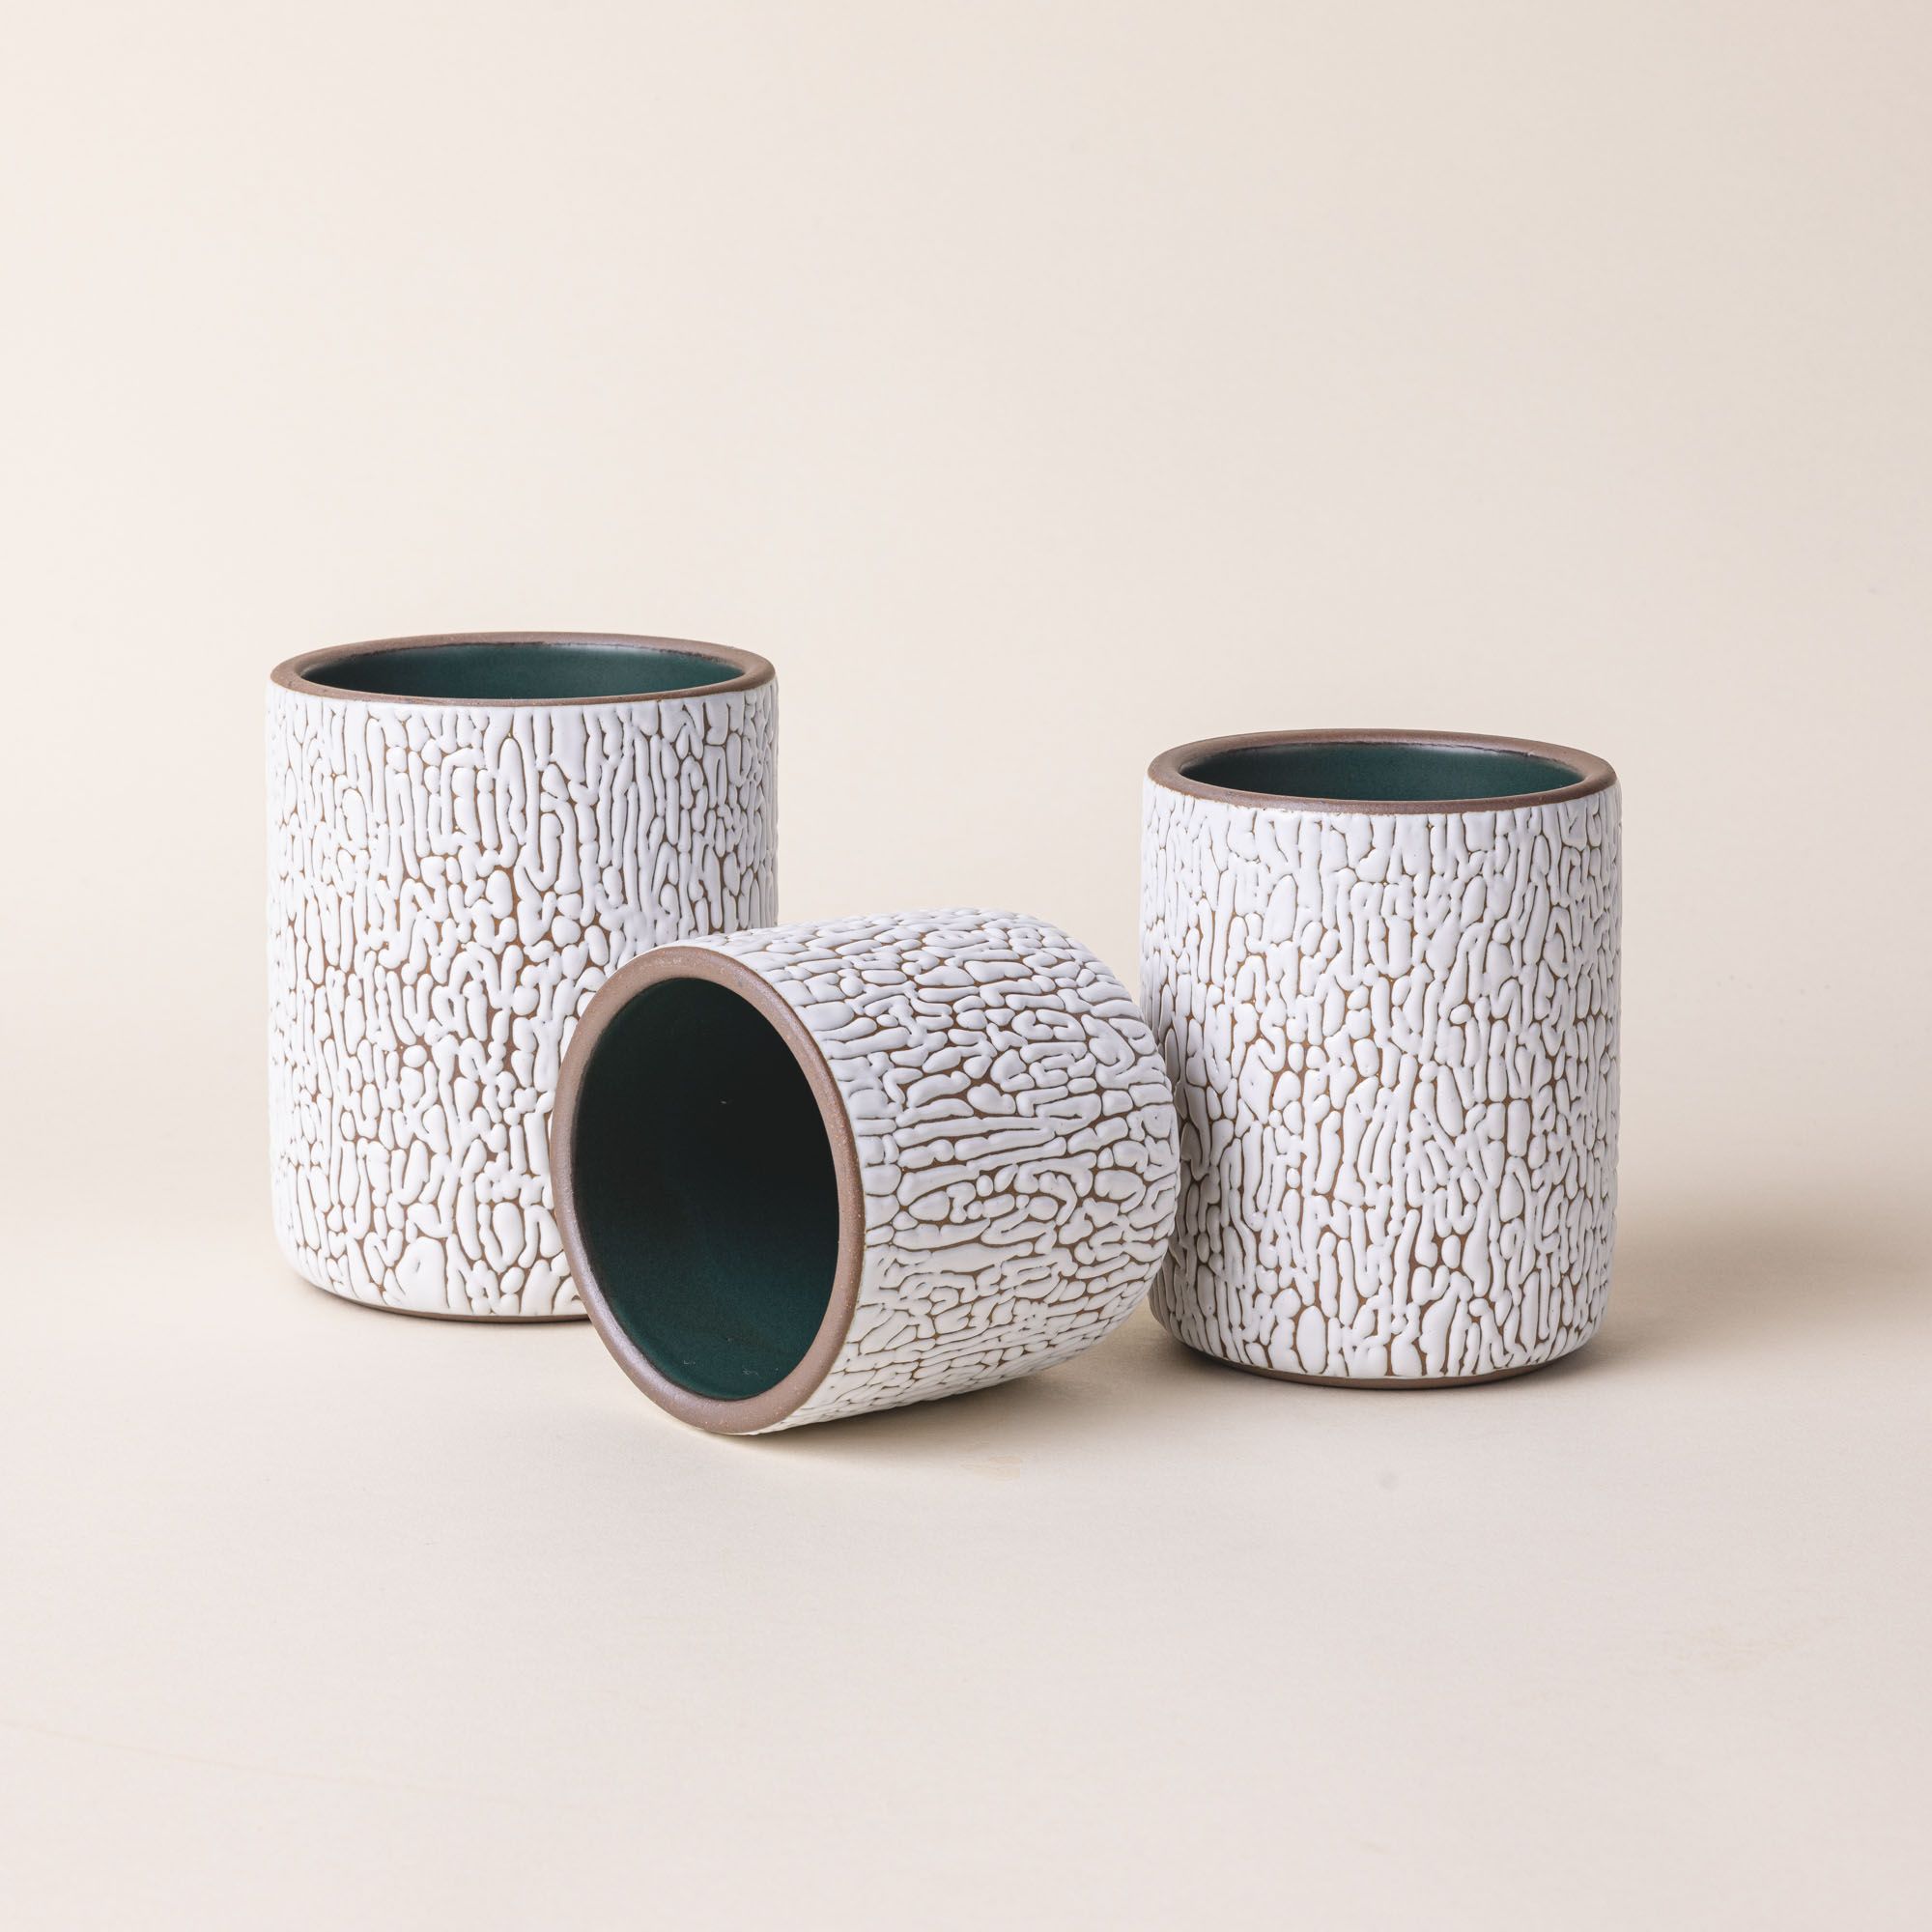 Three white ceramic vessels in Small, Medium, and Big with cracked texture and the interior being dark teal